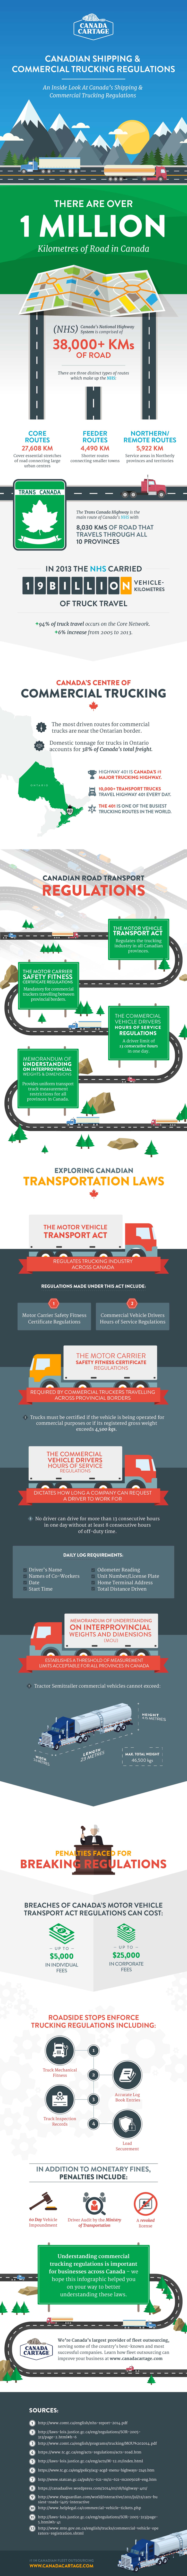 Canadian Shipping & Commercial Trucking Regulations